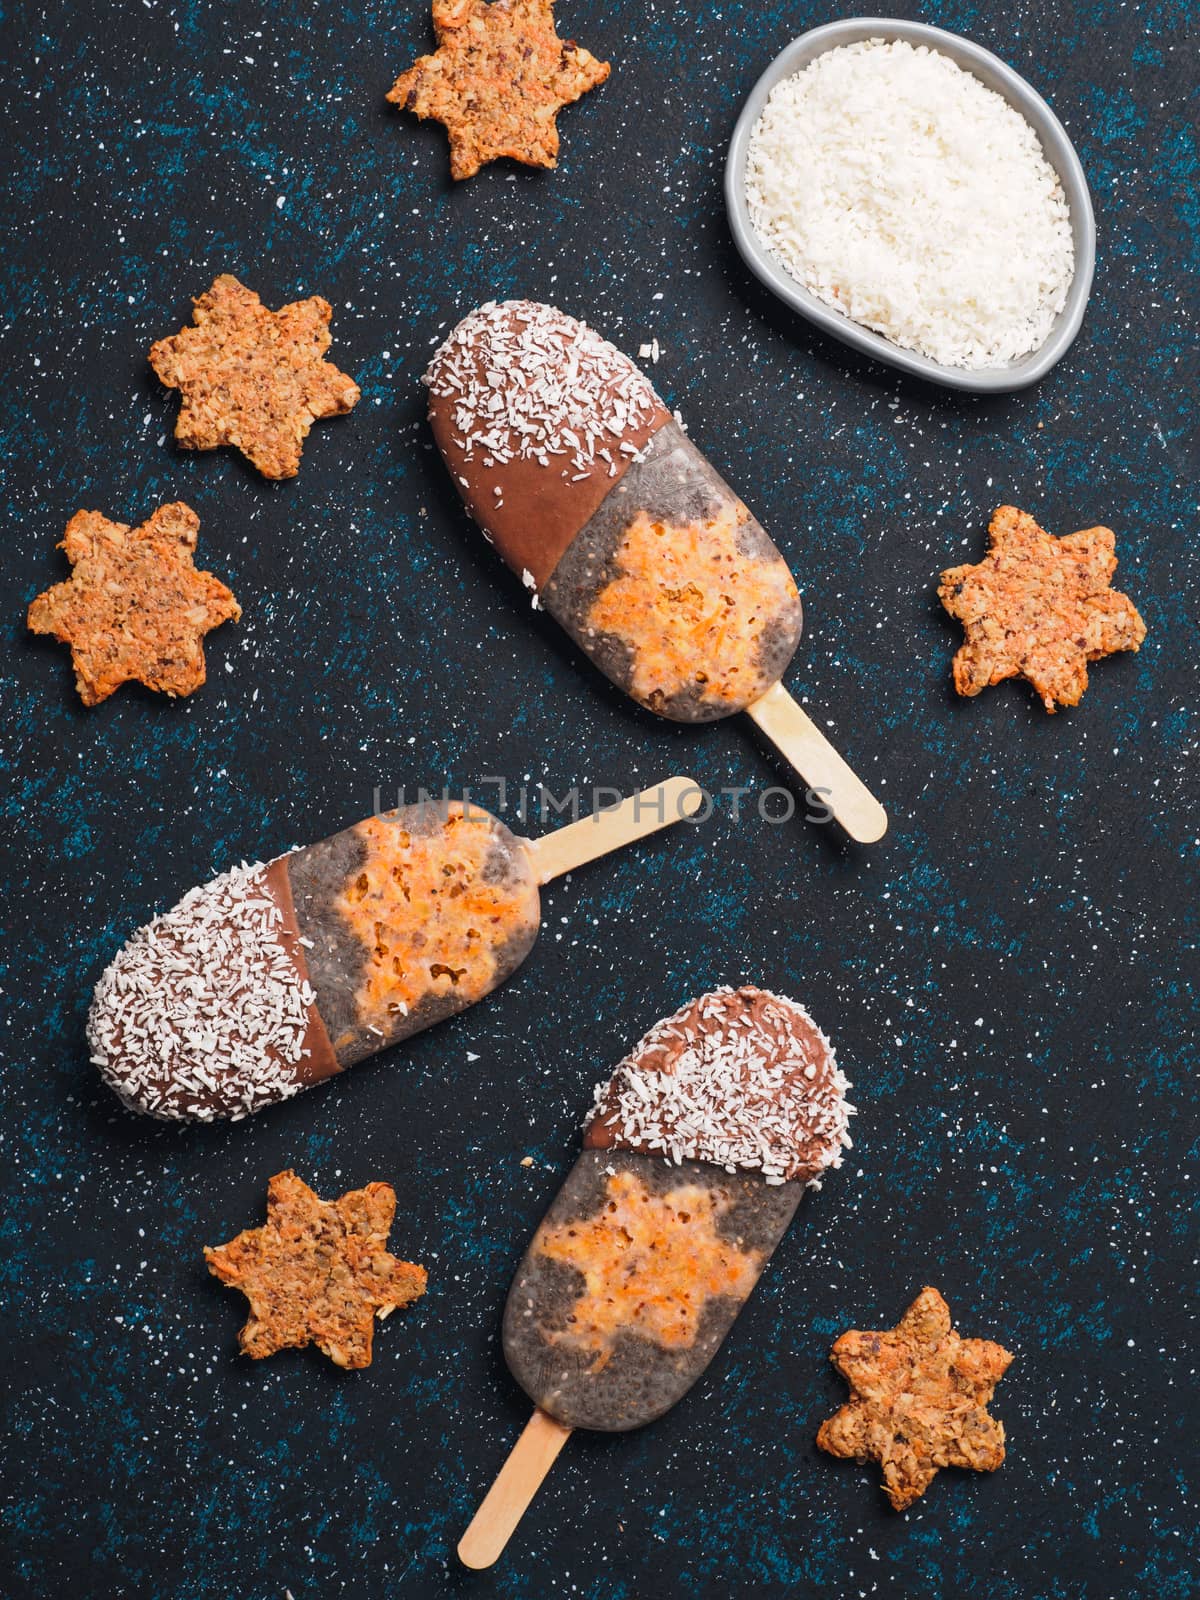 Chia popsicle with raw carrot cake and chocolate on dark blue background. Healthy recipe and idea homemade vegan popsicle ice cream. Easter dessert idea. Top view or flat-lay. Vertical.